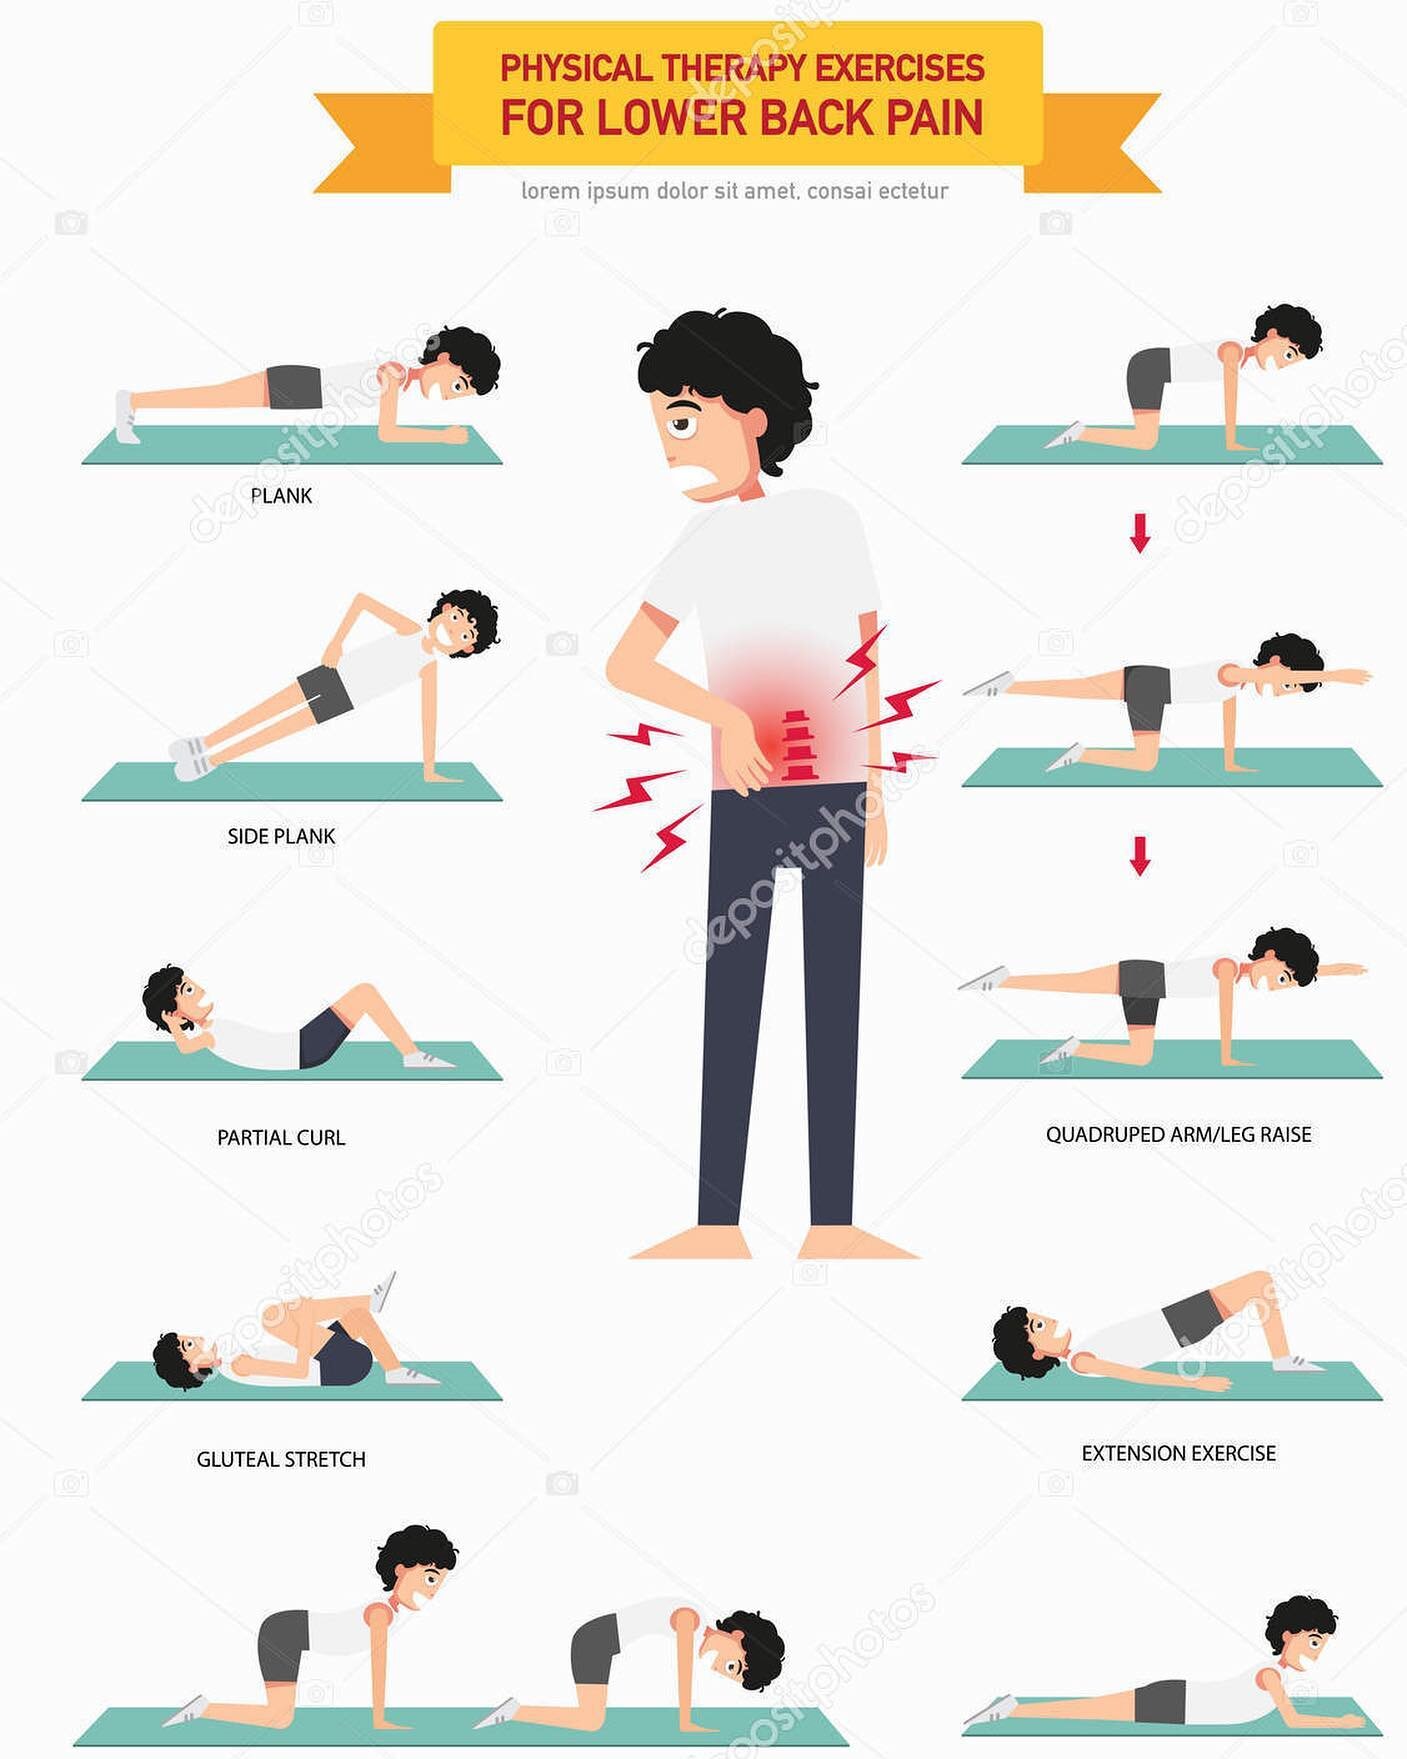 BACK PAIN ▶️ Do this highly recommended. And walk, walk and walk...